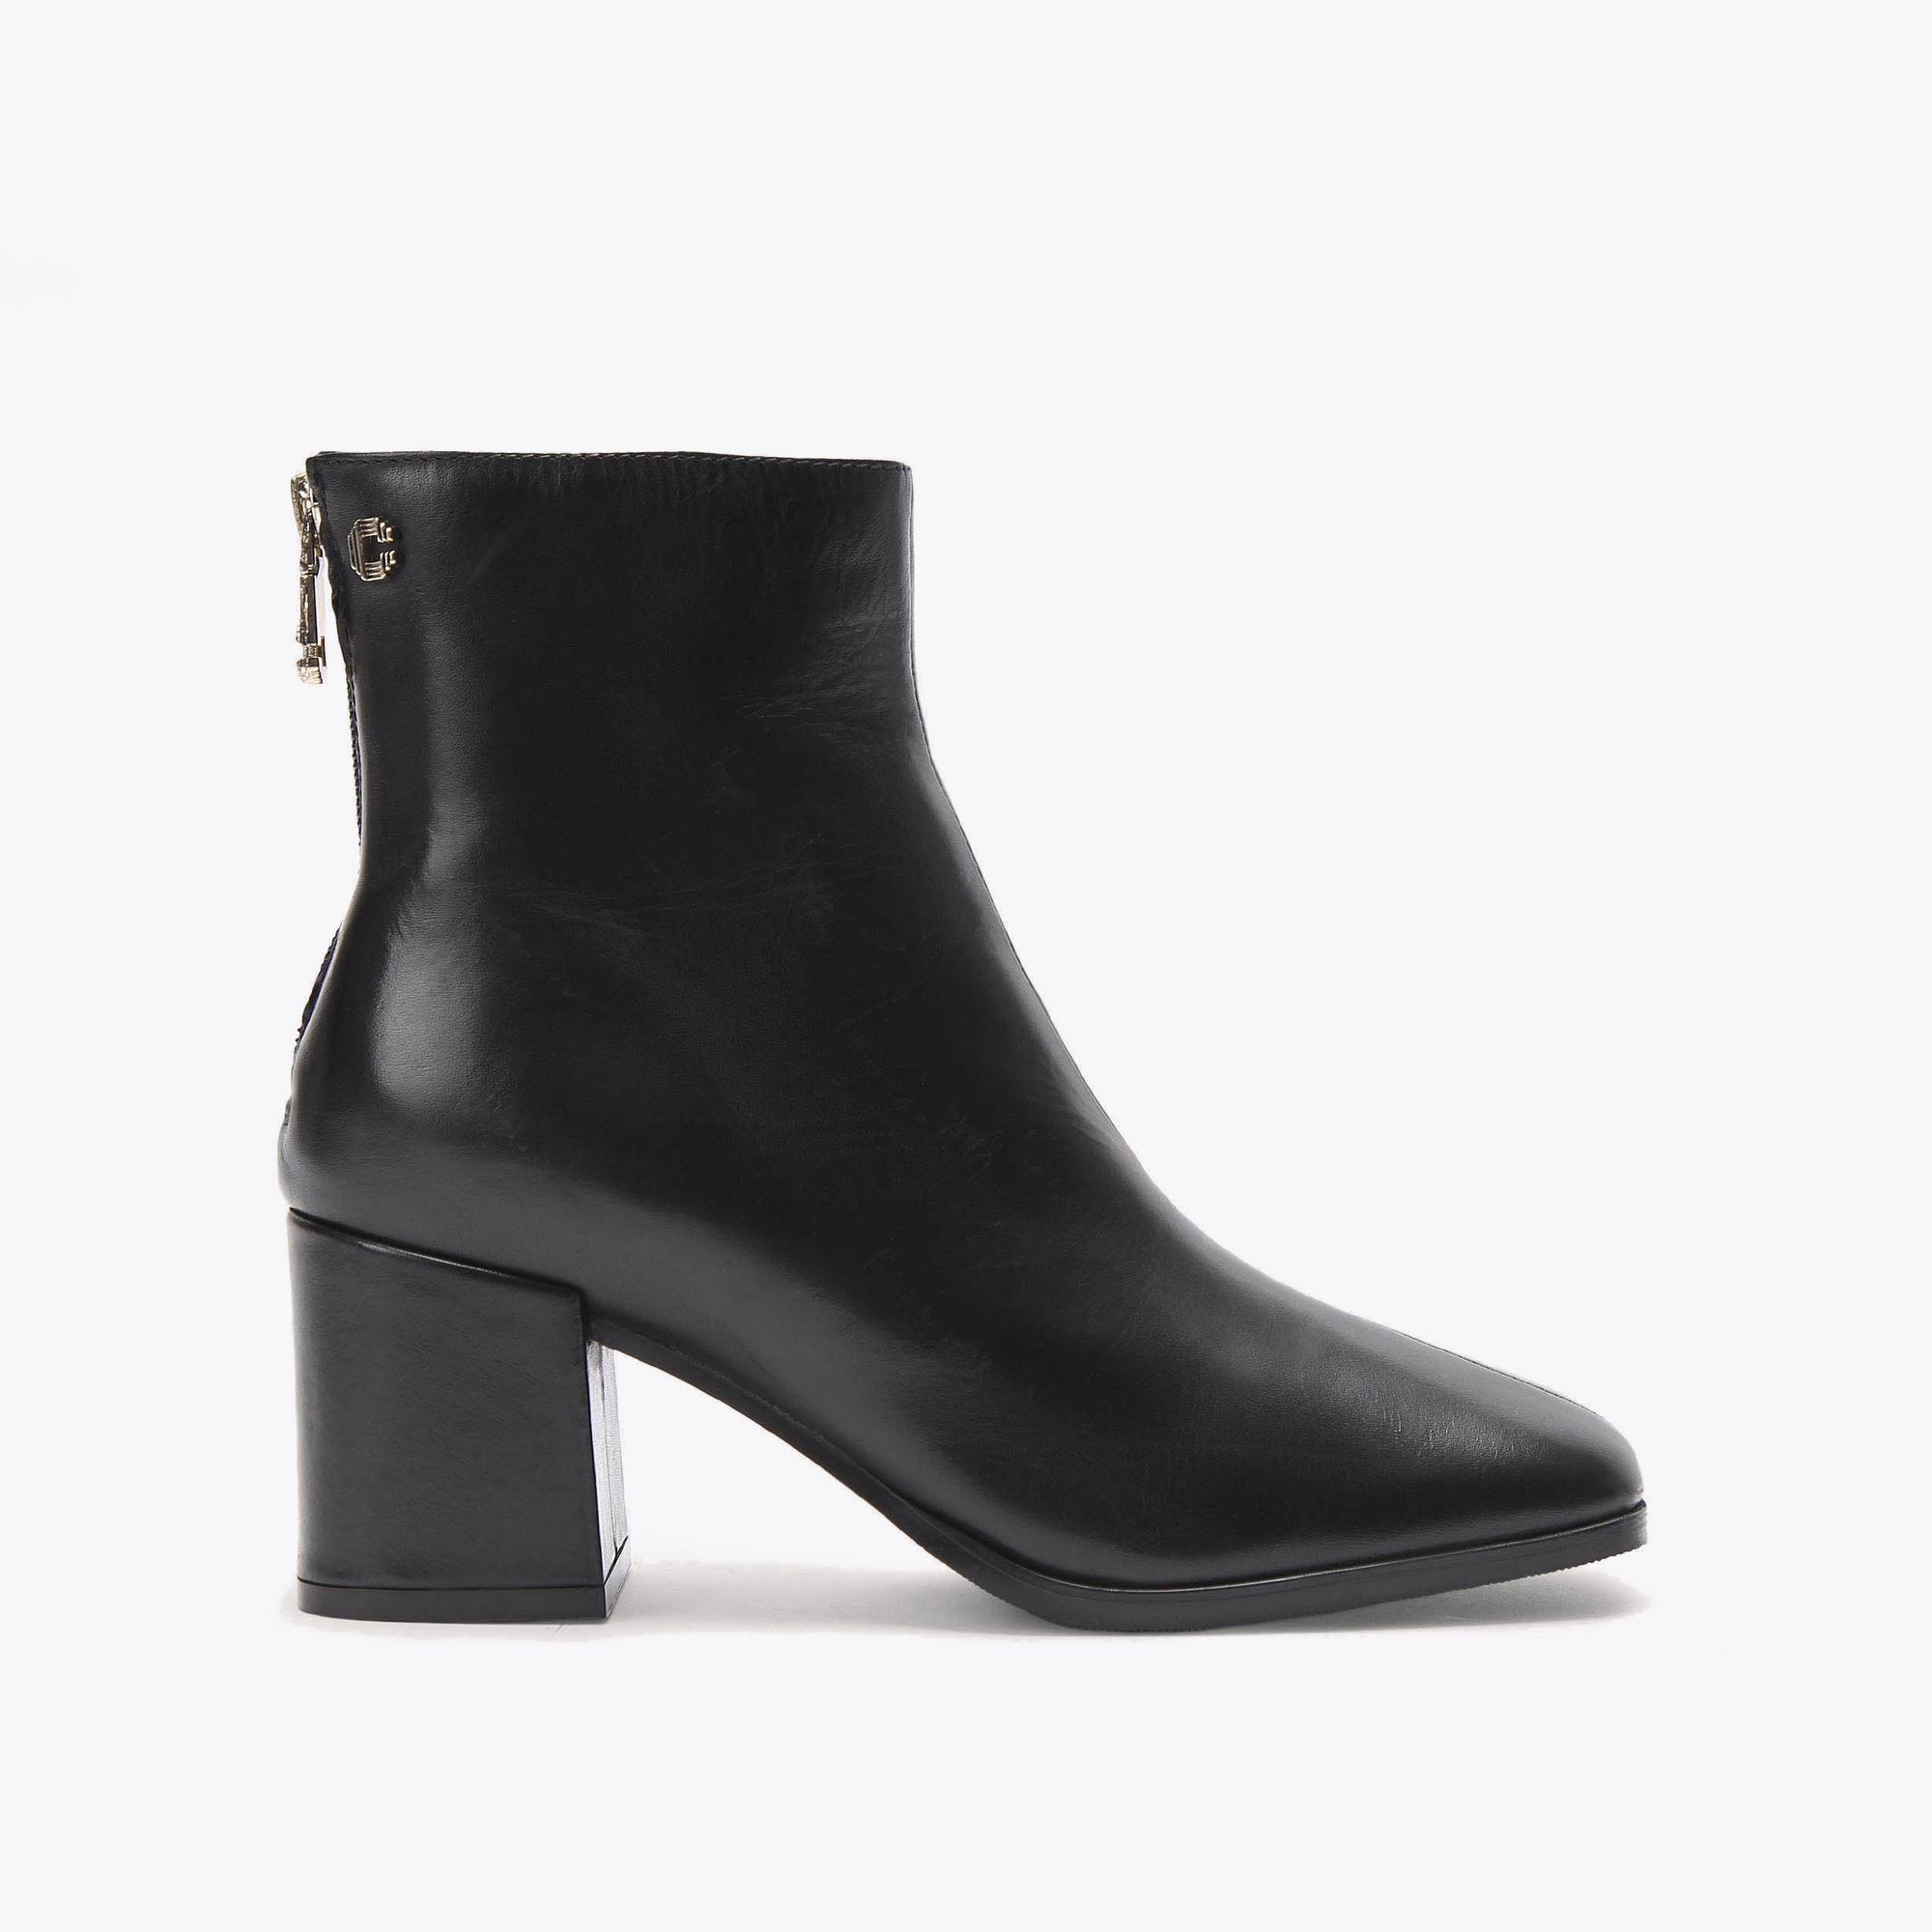 SOOTHE ANKLE Black Leather Block Heel Ankle Boot by CARVELA COMFORT